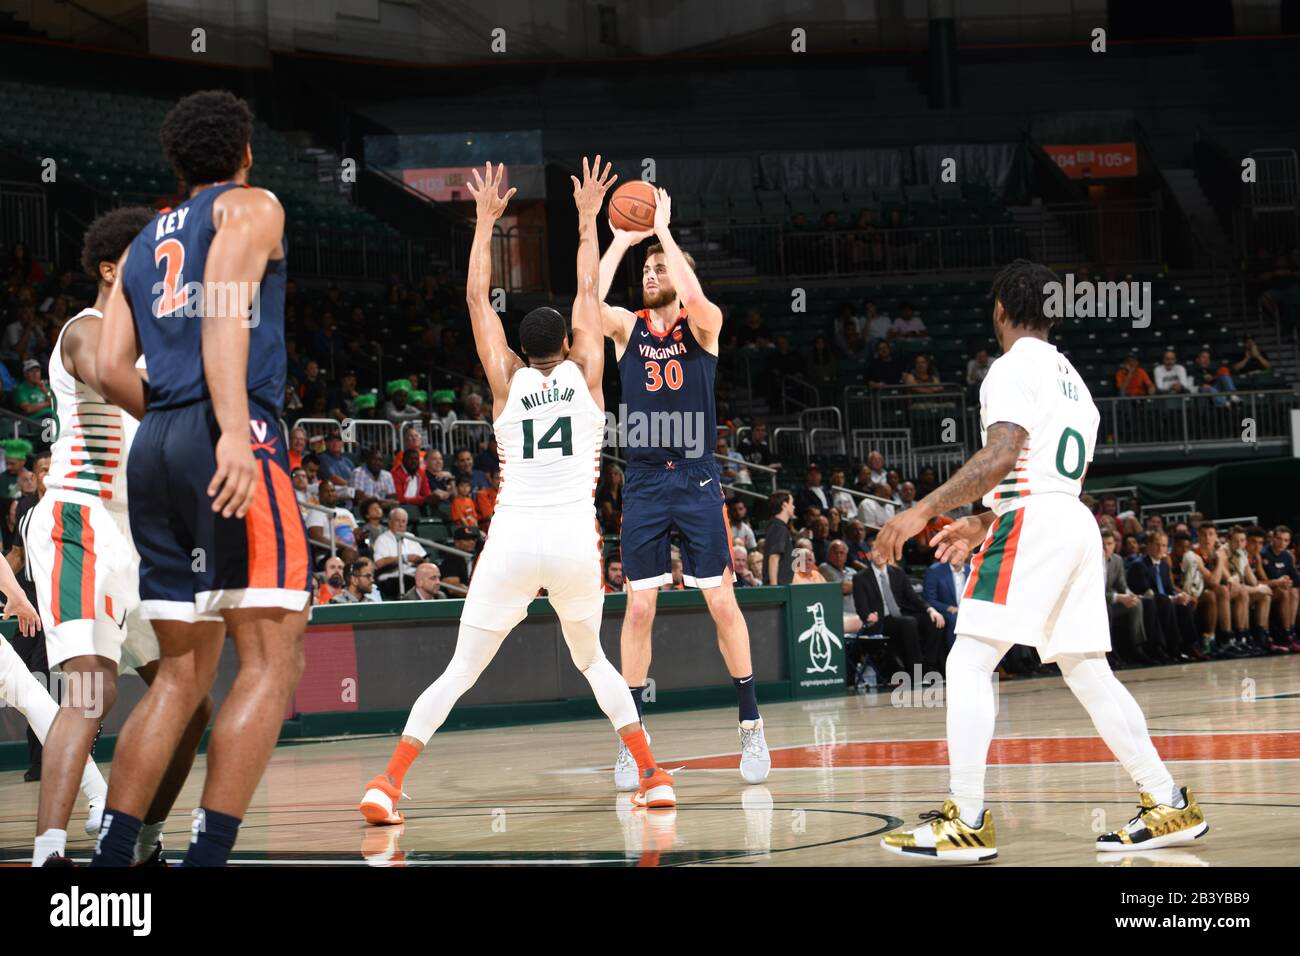 March 4, 2020: Jay Huff #30 of Virginia in action during the NCAA basketball game between the Miami Hurricanes and the Virginia Cavaliers in Coral Gables, Florida. The Cavaliers defeated the 'Canes 46-44. Stock Photo